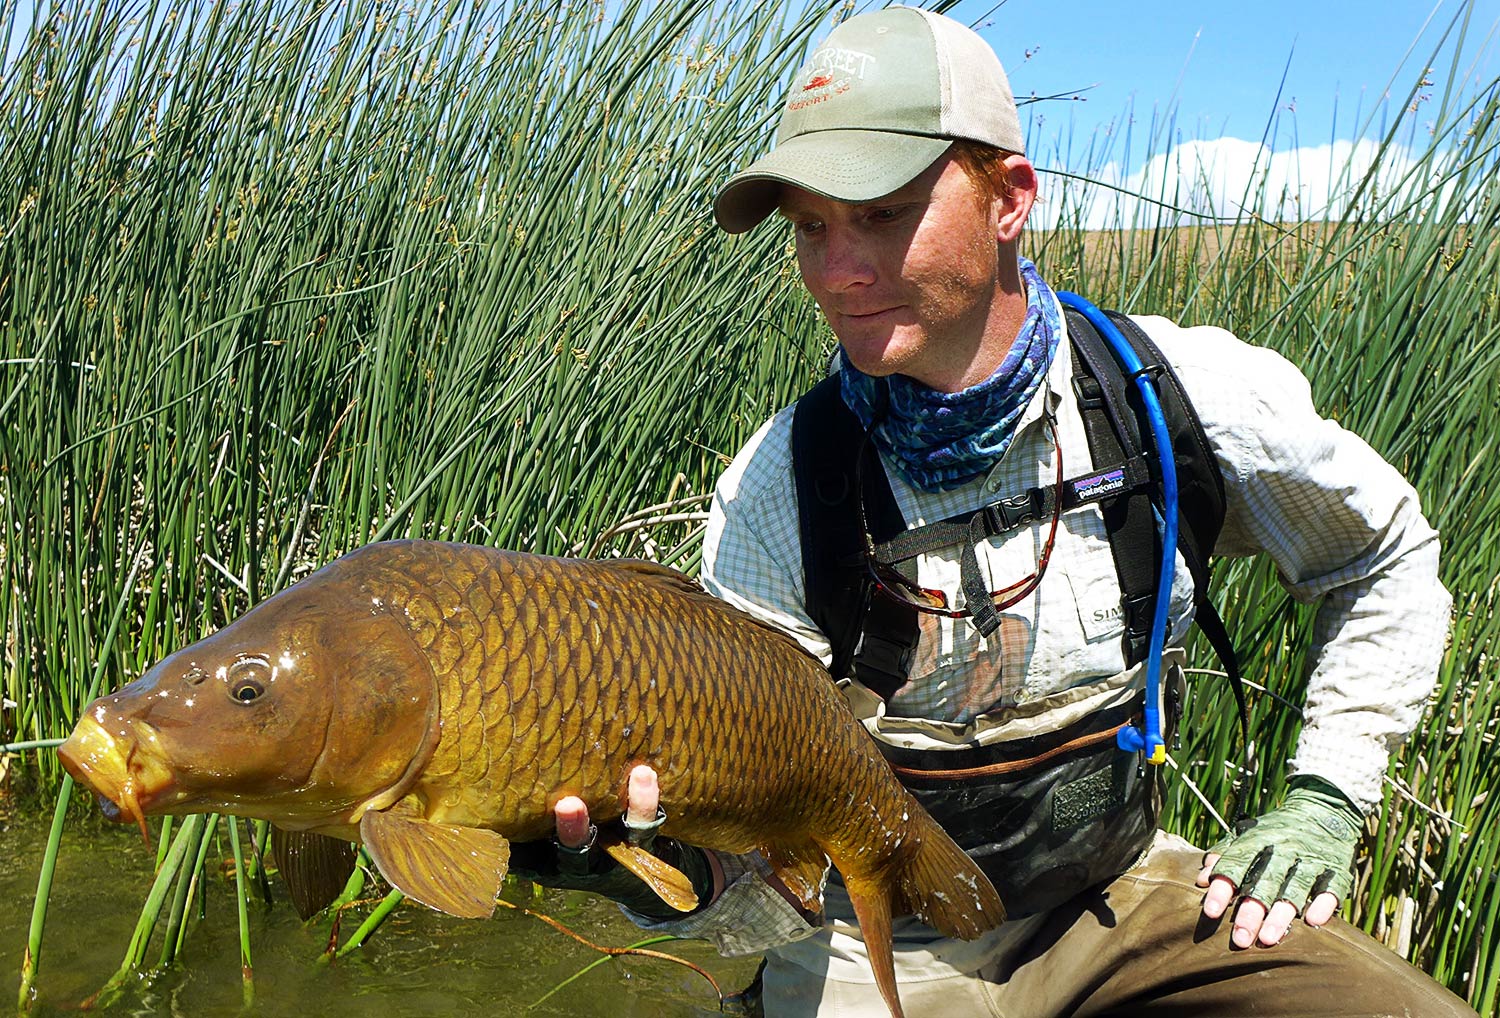 Finding the Hidden Carp - Fly Fishing, Gink and Gasoline